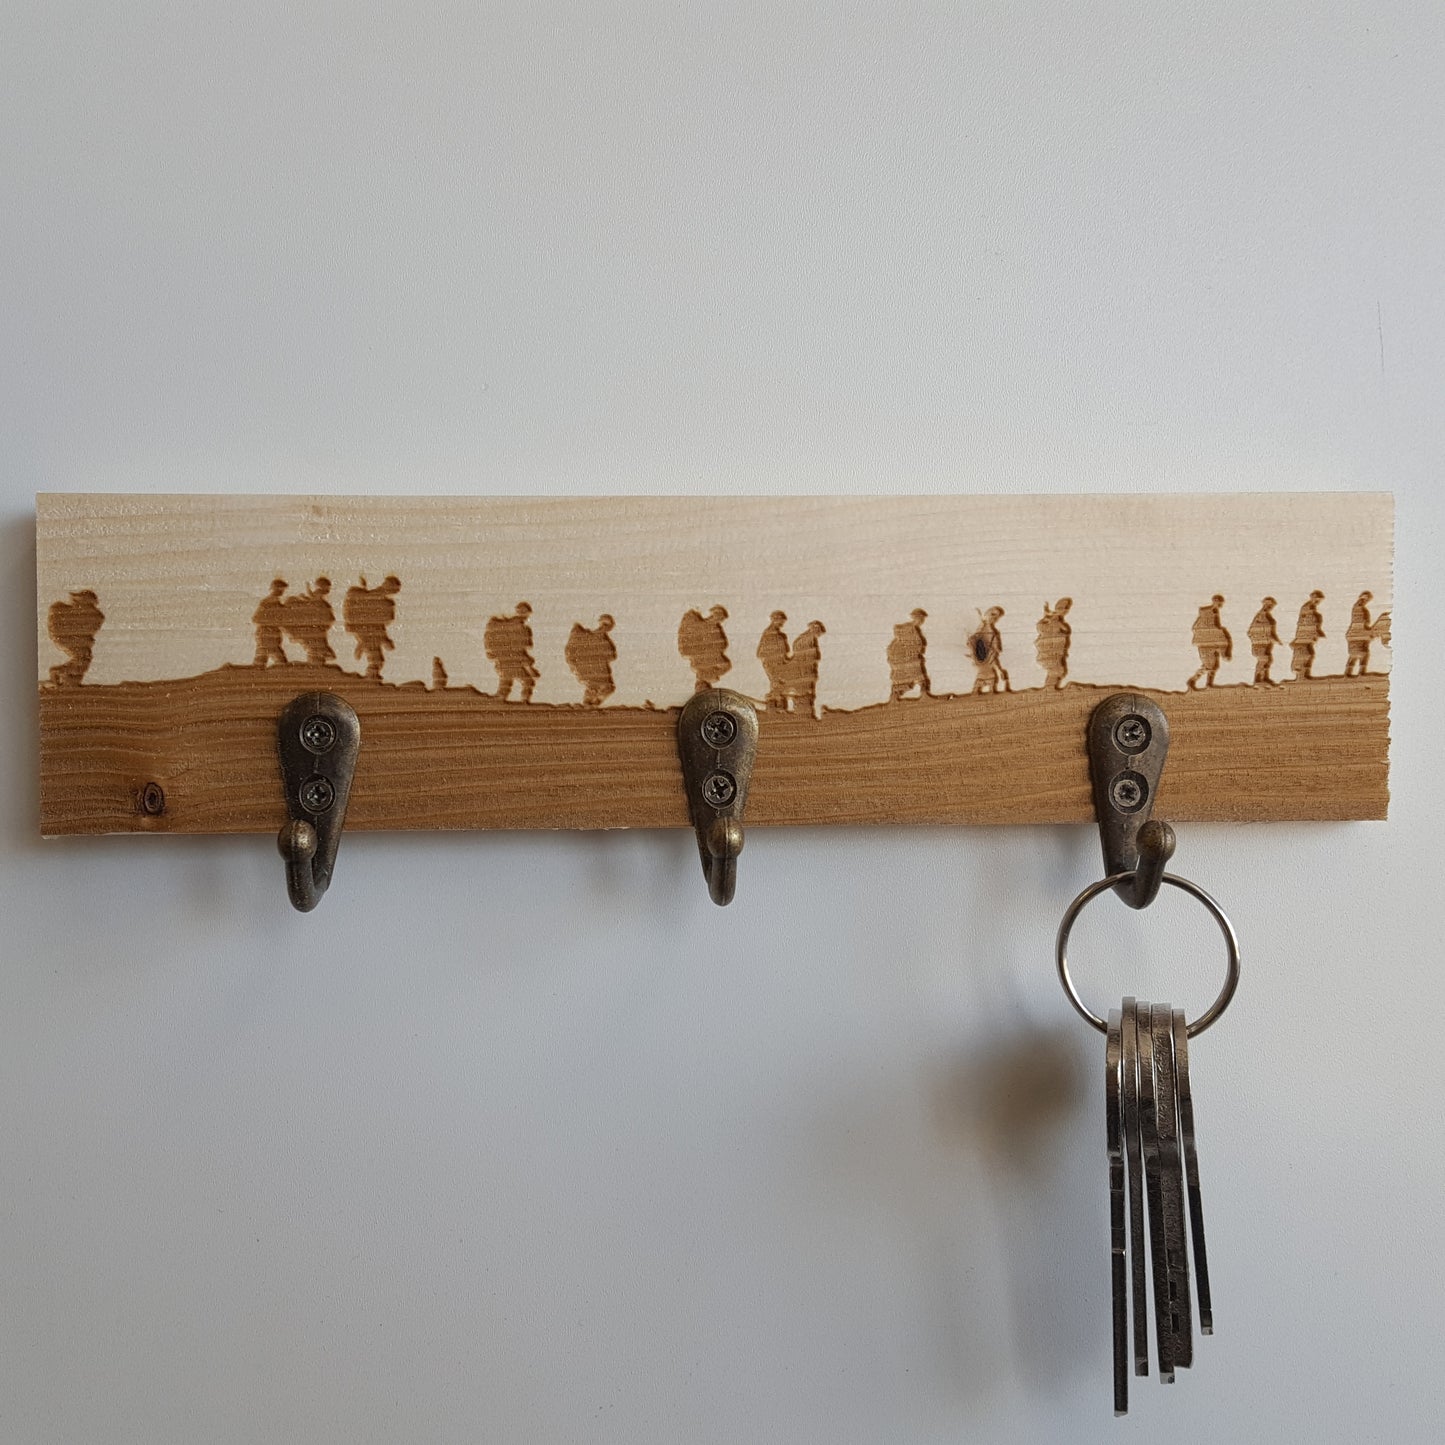 Remembrance Soldiers Key Holder